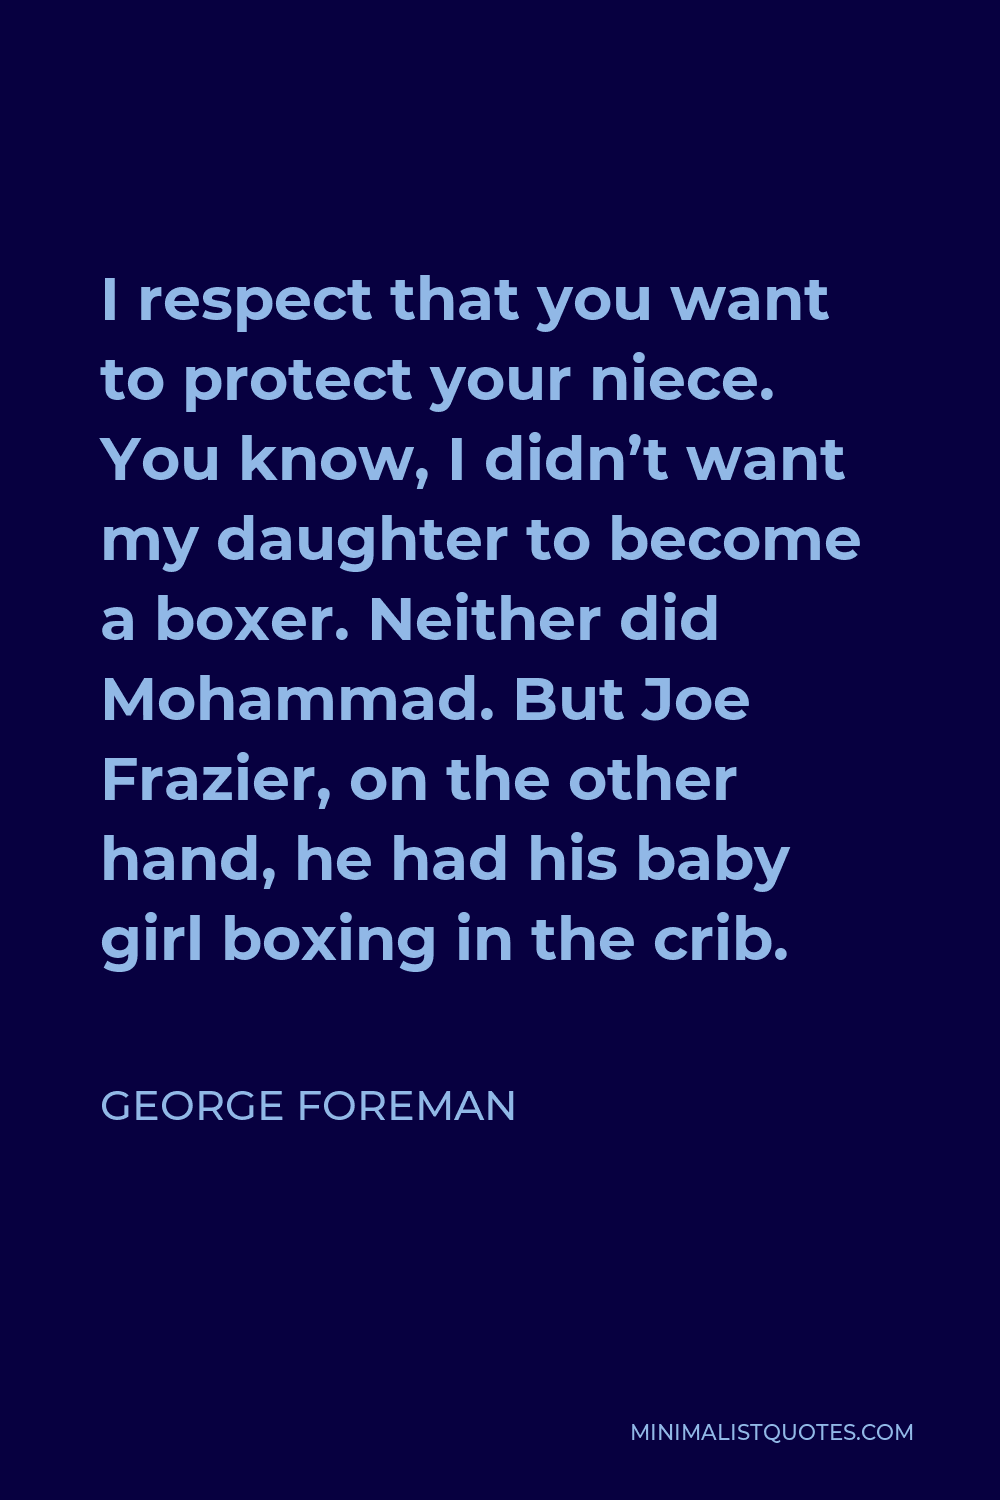 George Foreman Quote - I respect that you want to protect your niece. You know, I didn’t want my daughter to become a boxer. Neither did Mohammad. But Joe Frazier, on the other hand, he had his baby girl boxing in the crib.